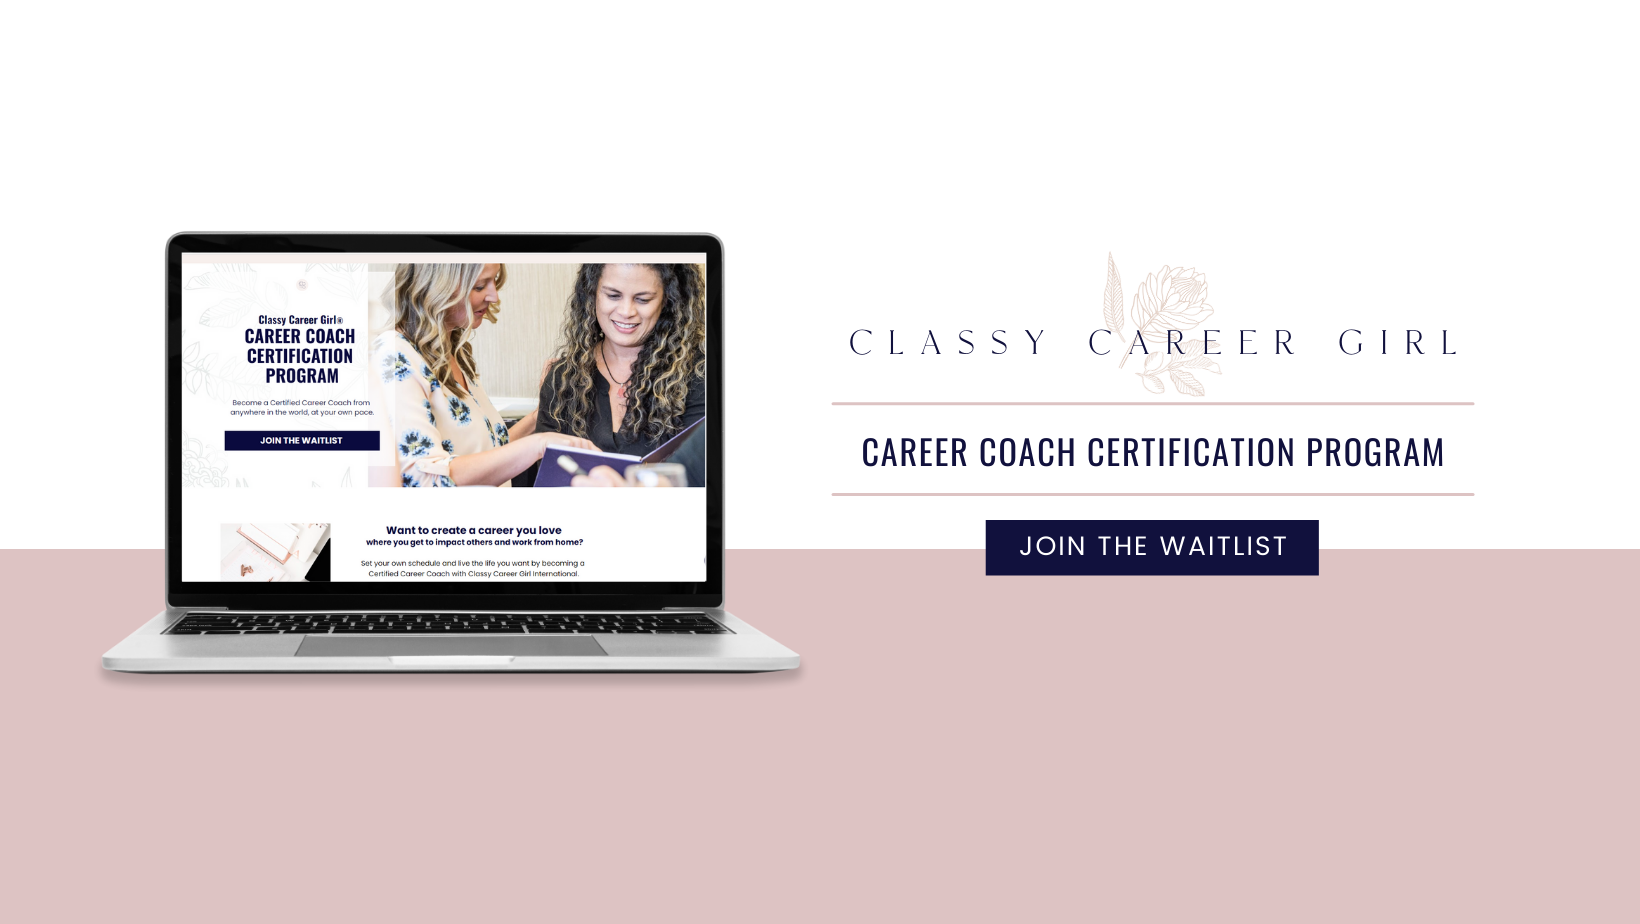 Join the Classy Career Girl Career Coach Certification Program and build your coaching business today!